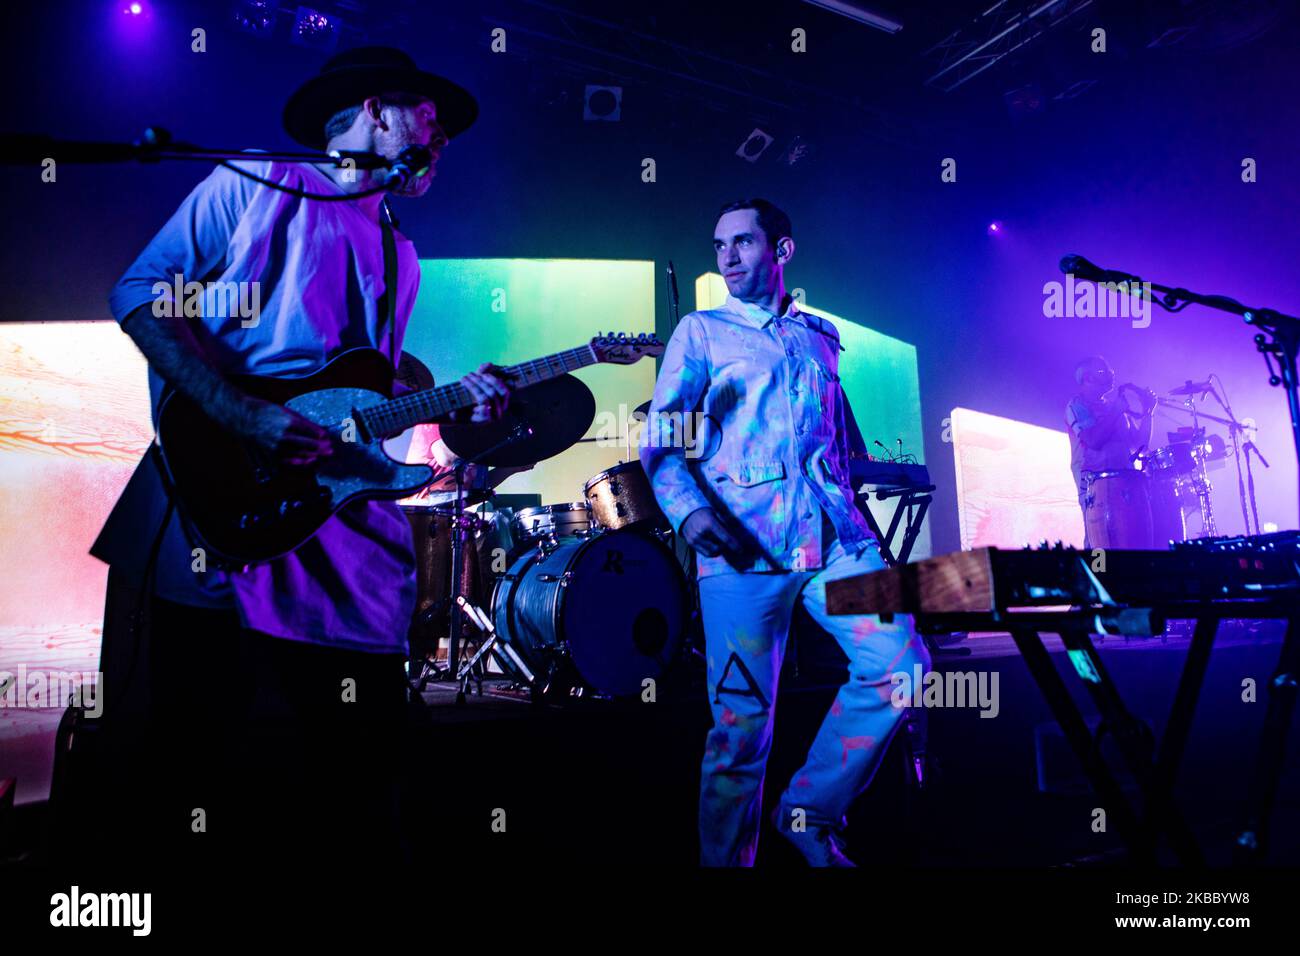 Al Doyle (L) and Owen Clarke (R) of English synth-pop band Hot chip performs at Alcatraz in Milano, Italy, on November 30 2019. The group consists of multi-instrumentalists Alexis Taylor, and Felix Martin. They are occasionally supplemented by Rob Smoughton and Sarah Jones for live performances and studio recordings. The group primarily produces music in the synth-pop and alternative dance genres, drawing influences from house and disco. (Photo by Mairo Cinquetti/NurPhoto) Stock Photo